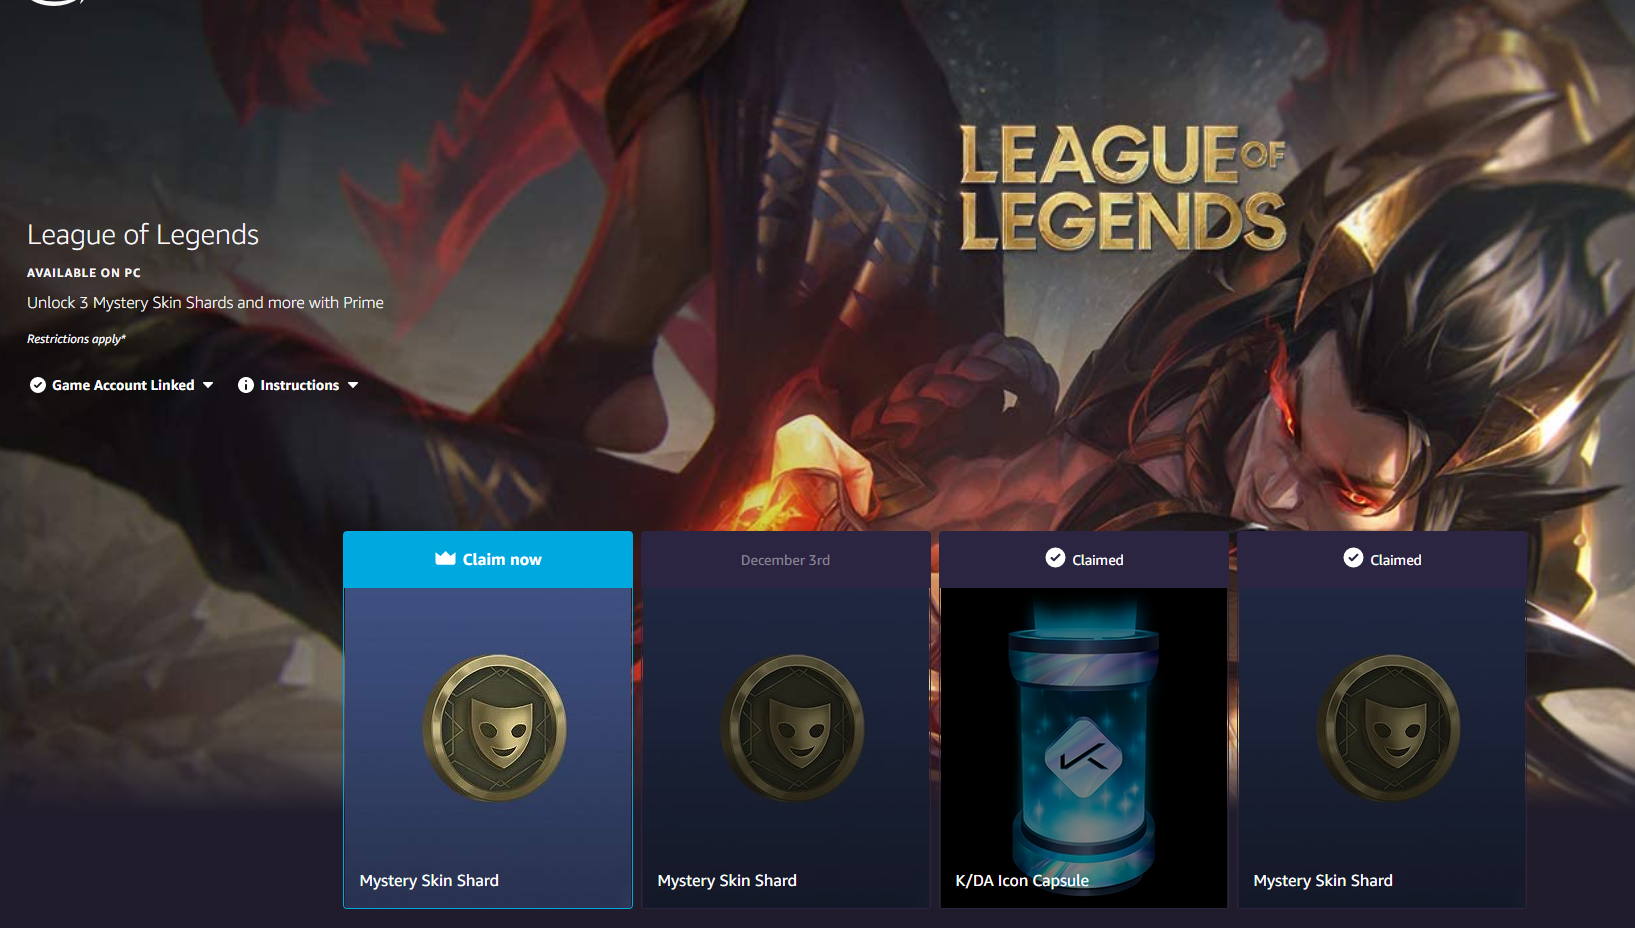 Prime Gaming And Riot Games Extend Deal To Give 'League Of Legends